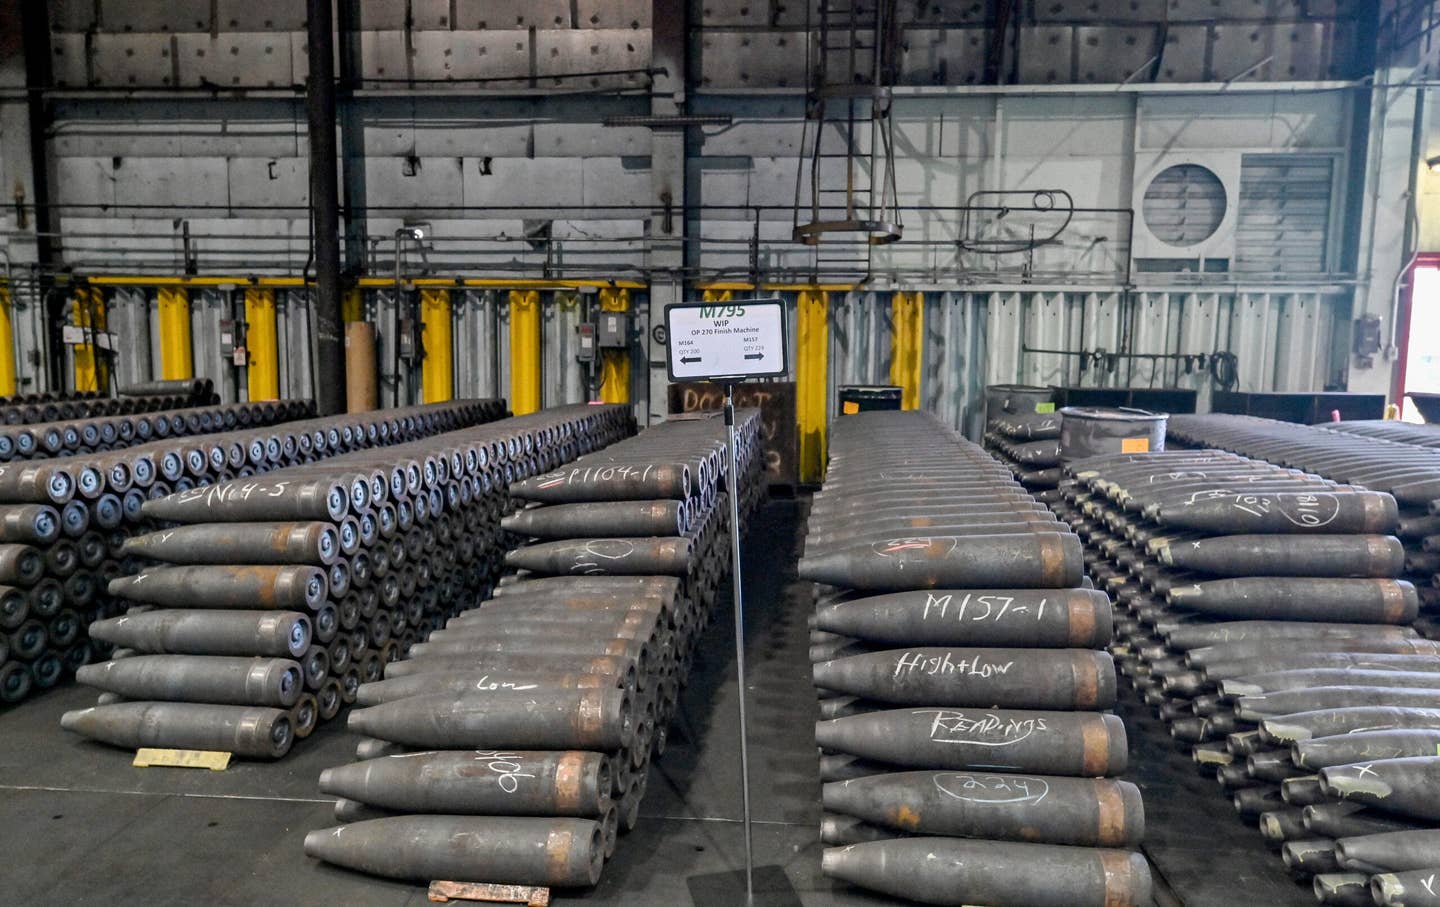 Rows of incomplete shells wait for the next step in production. The plant makes a 155mm artillery shell. (Photo by Aimee Dilger/SOPA Images/LightRocket via Getty Images)